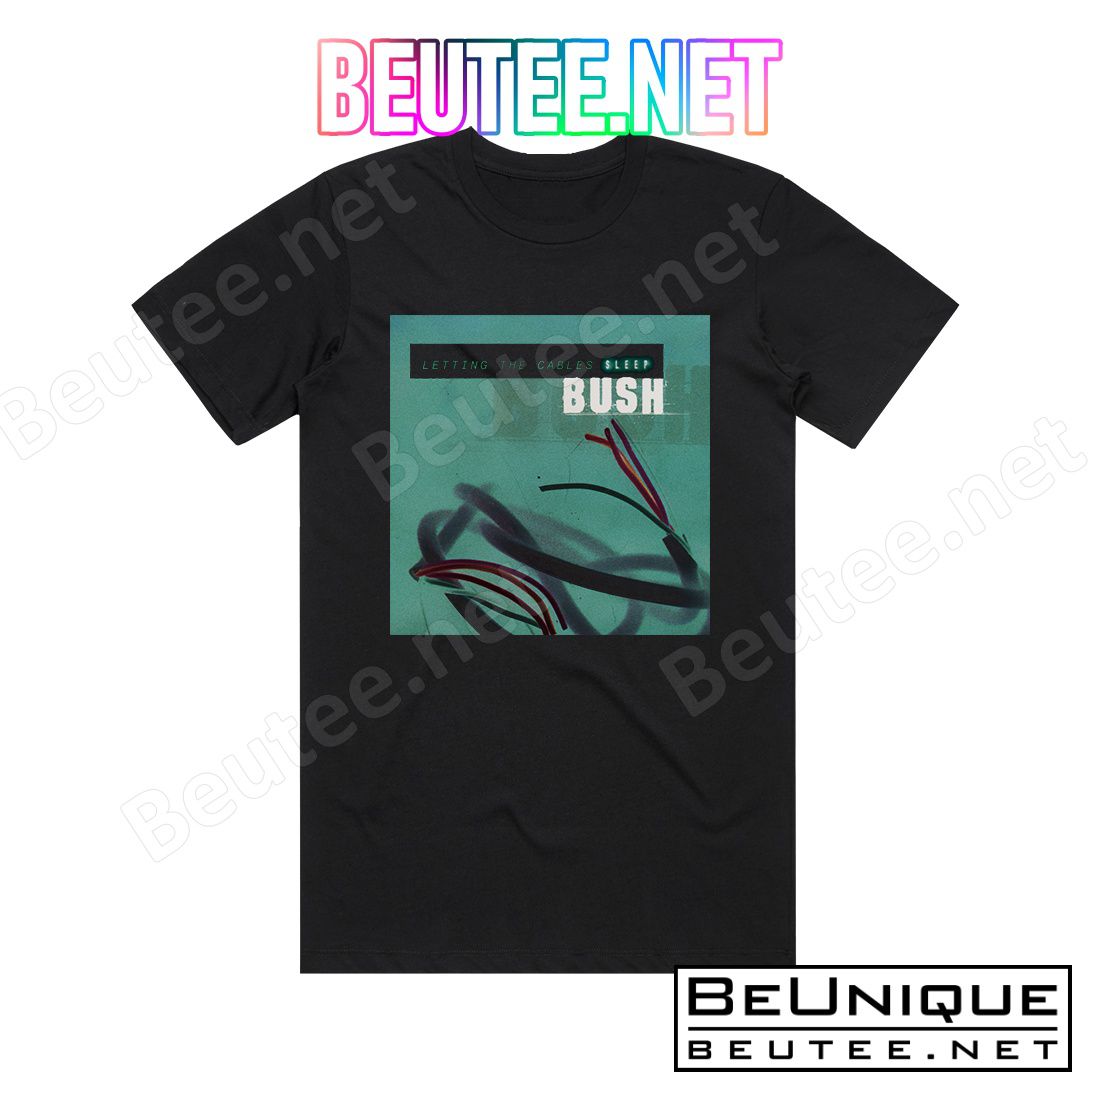 Bush Letting The Cables Sleep 1 Album Cover T-Shirt